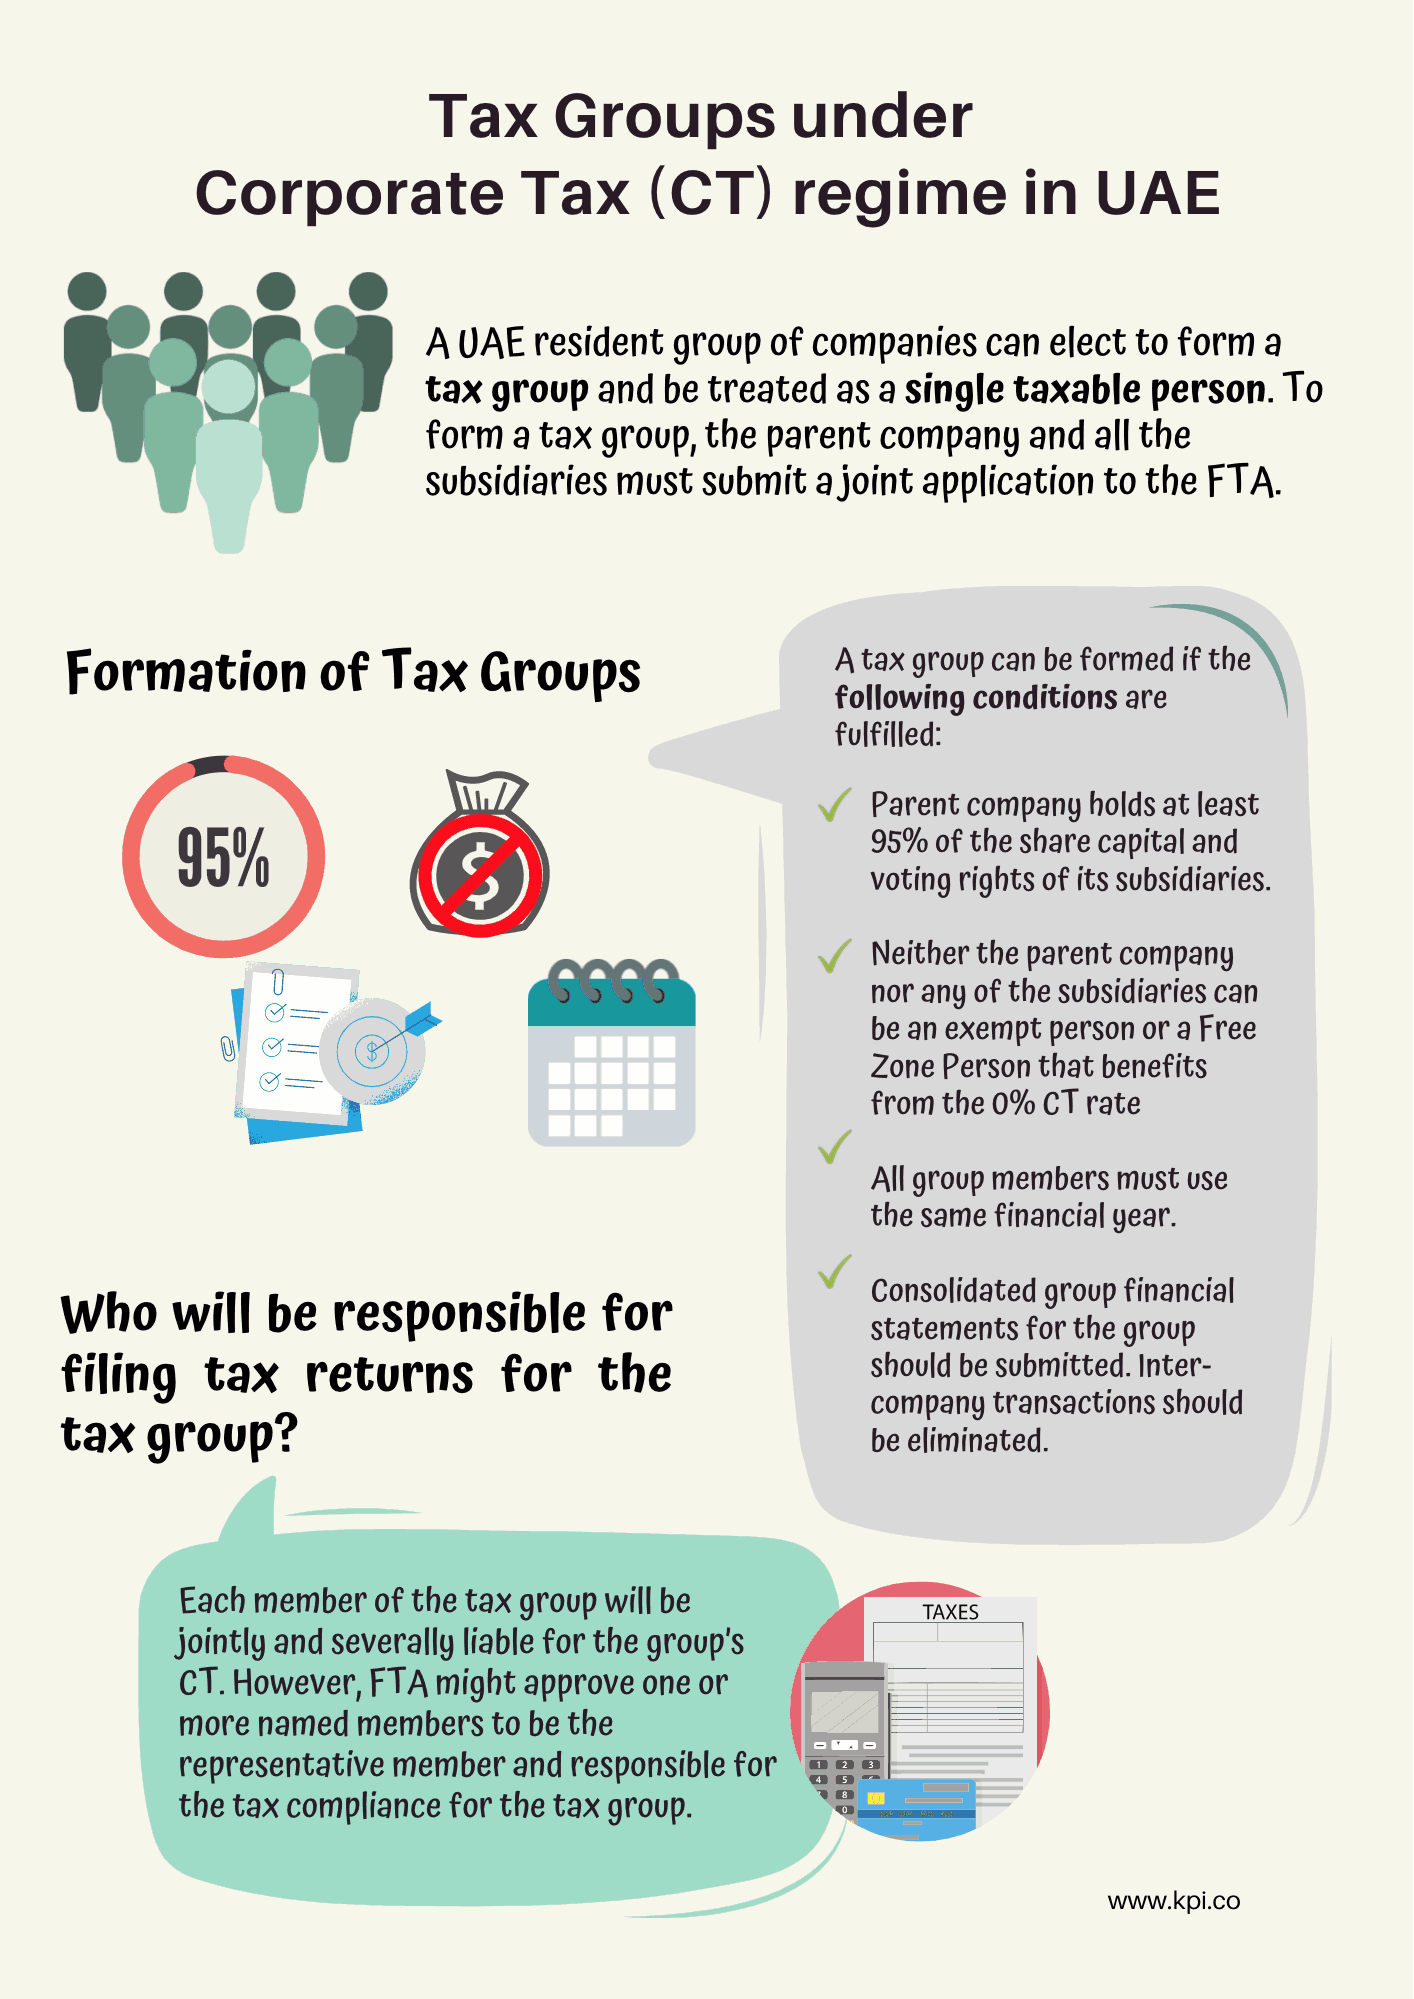 Infographic on formation of Tax Groups in the UAE Corporate Tax regime